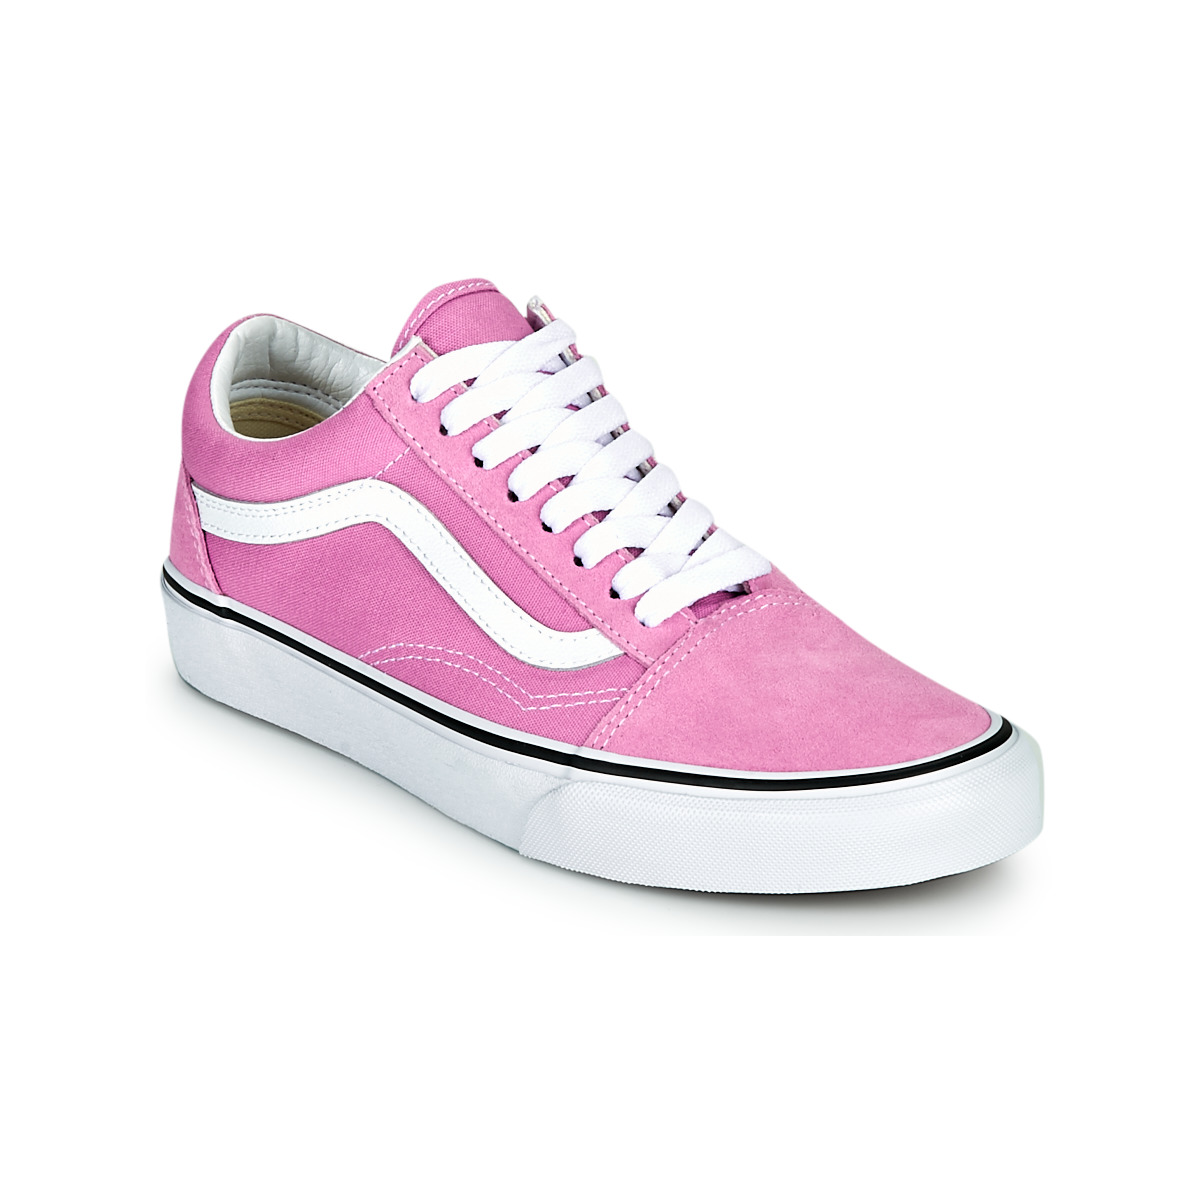 Chaussures Femme Fall Winter 2012 collaborative footwear collection with Vans OLD SKOOL Lilas